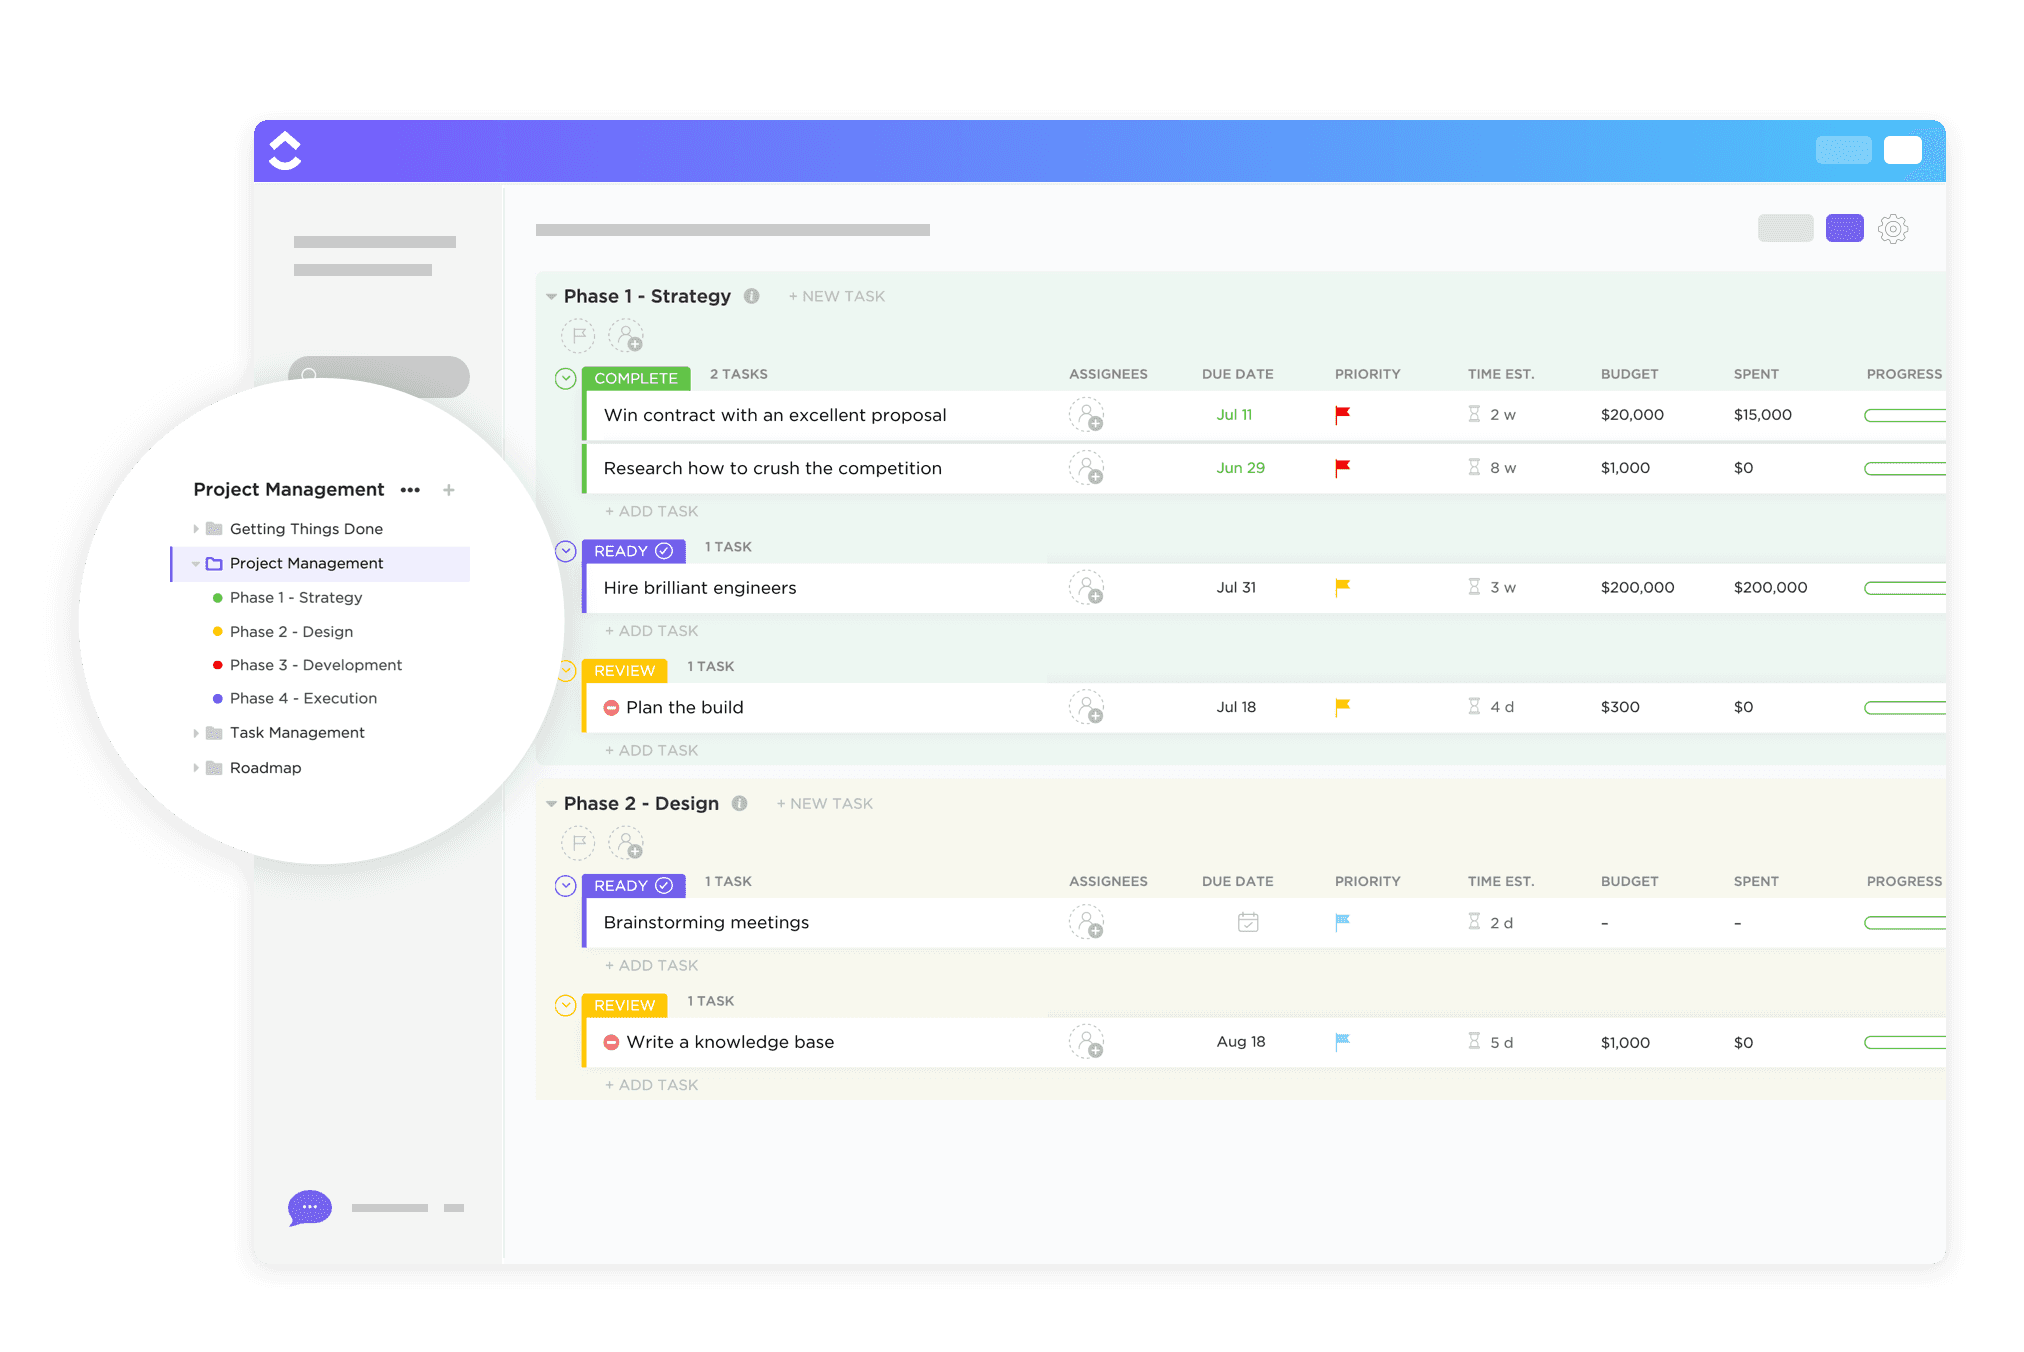 With its flexible pre-built views, Custom Statuses, Custom Fields, and more, ClickUp's project management template will instantly become any PM's new best friend.

